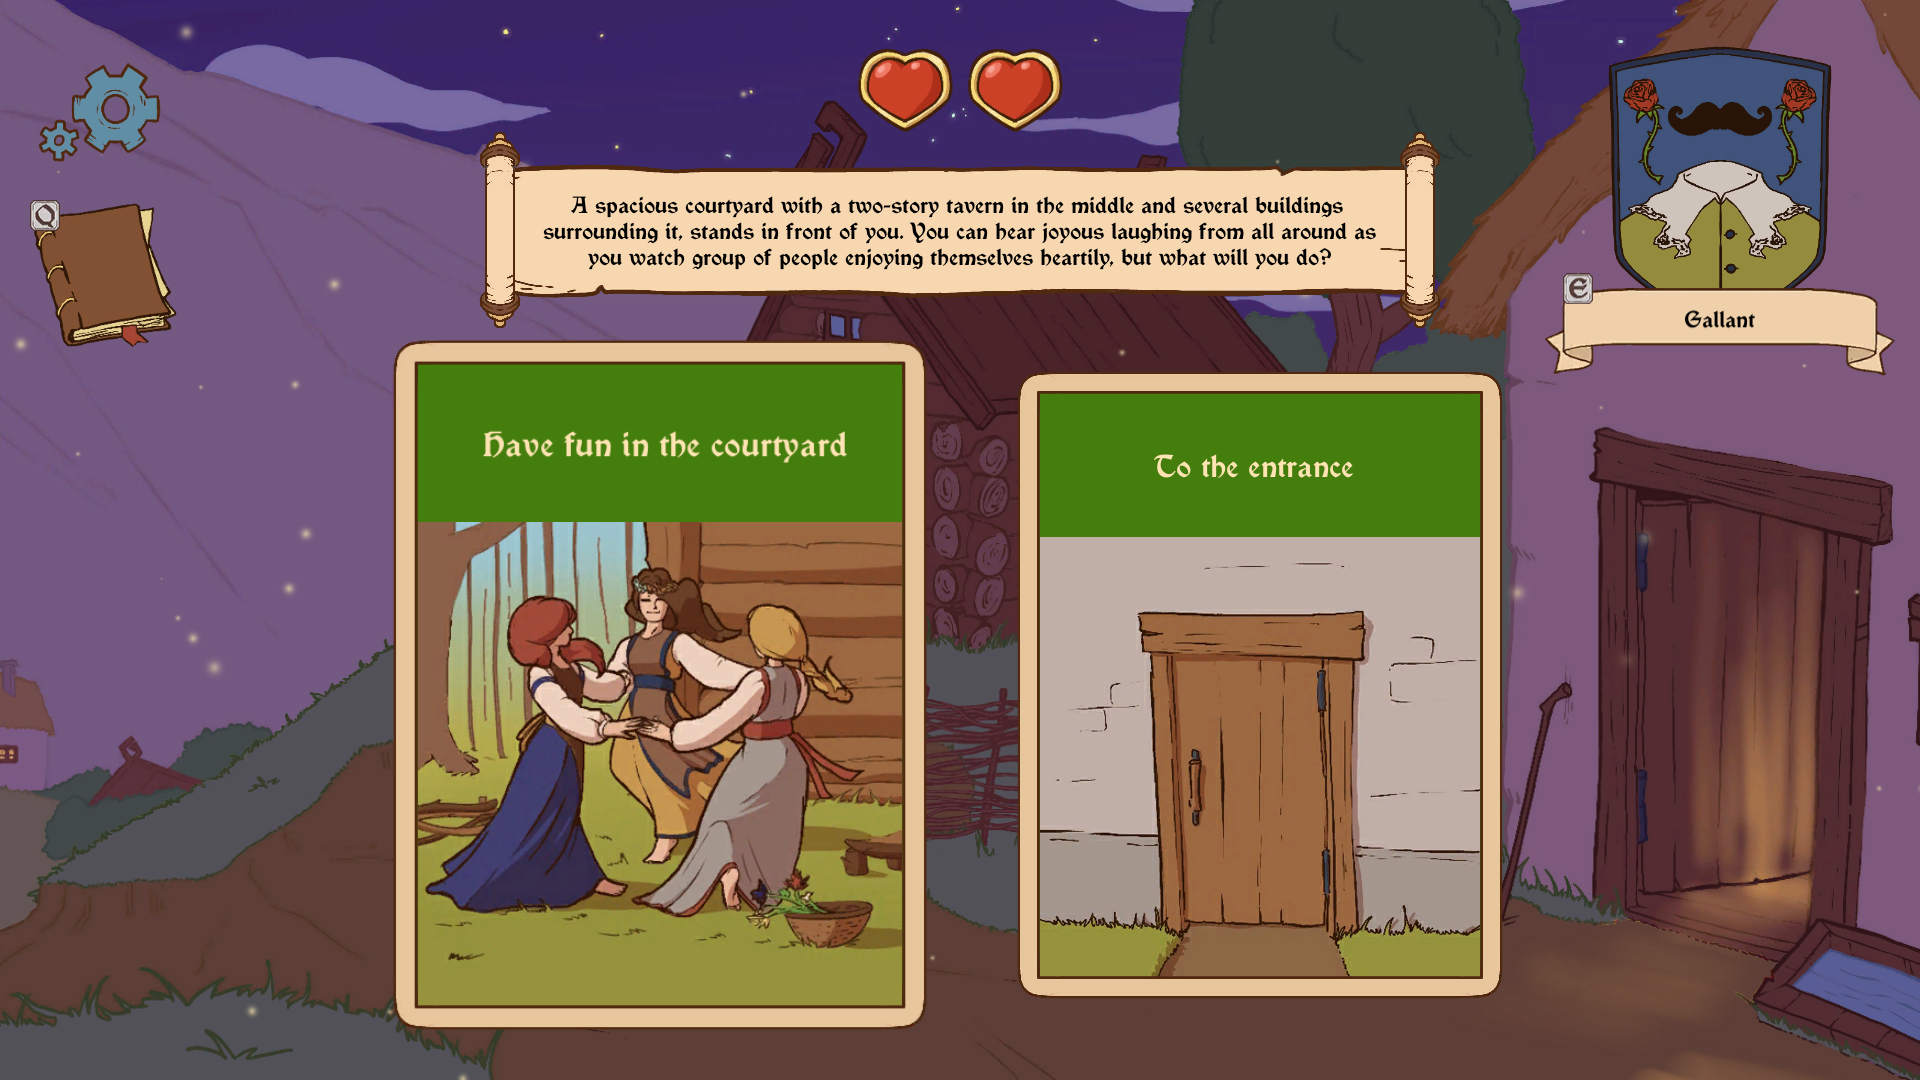 Scarica Choice of Life: Middle Ages 2 gratis per Android.